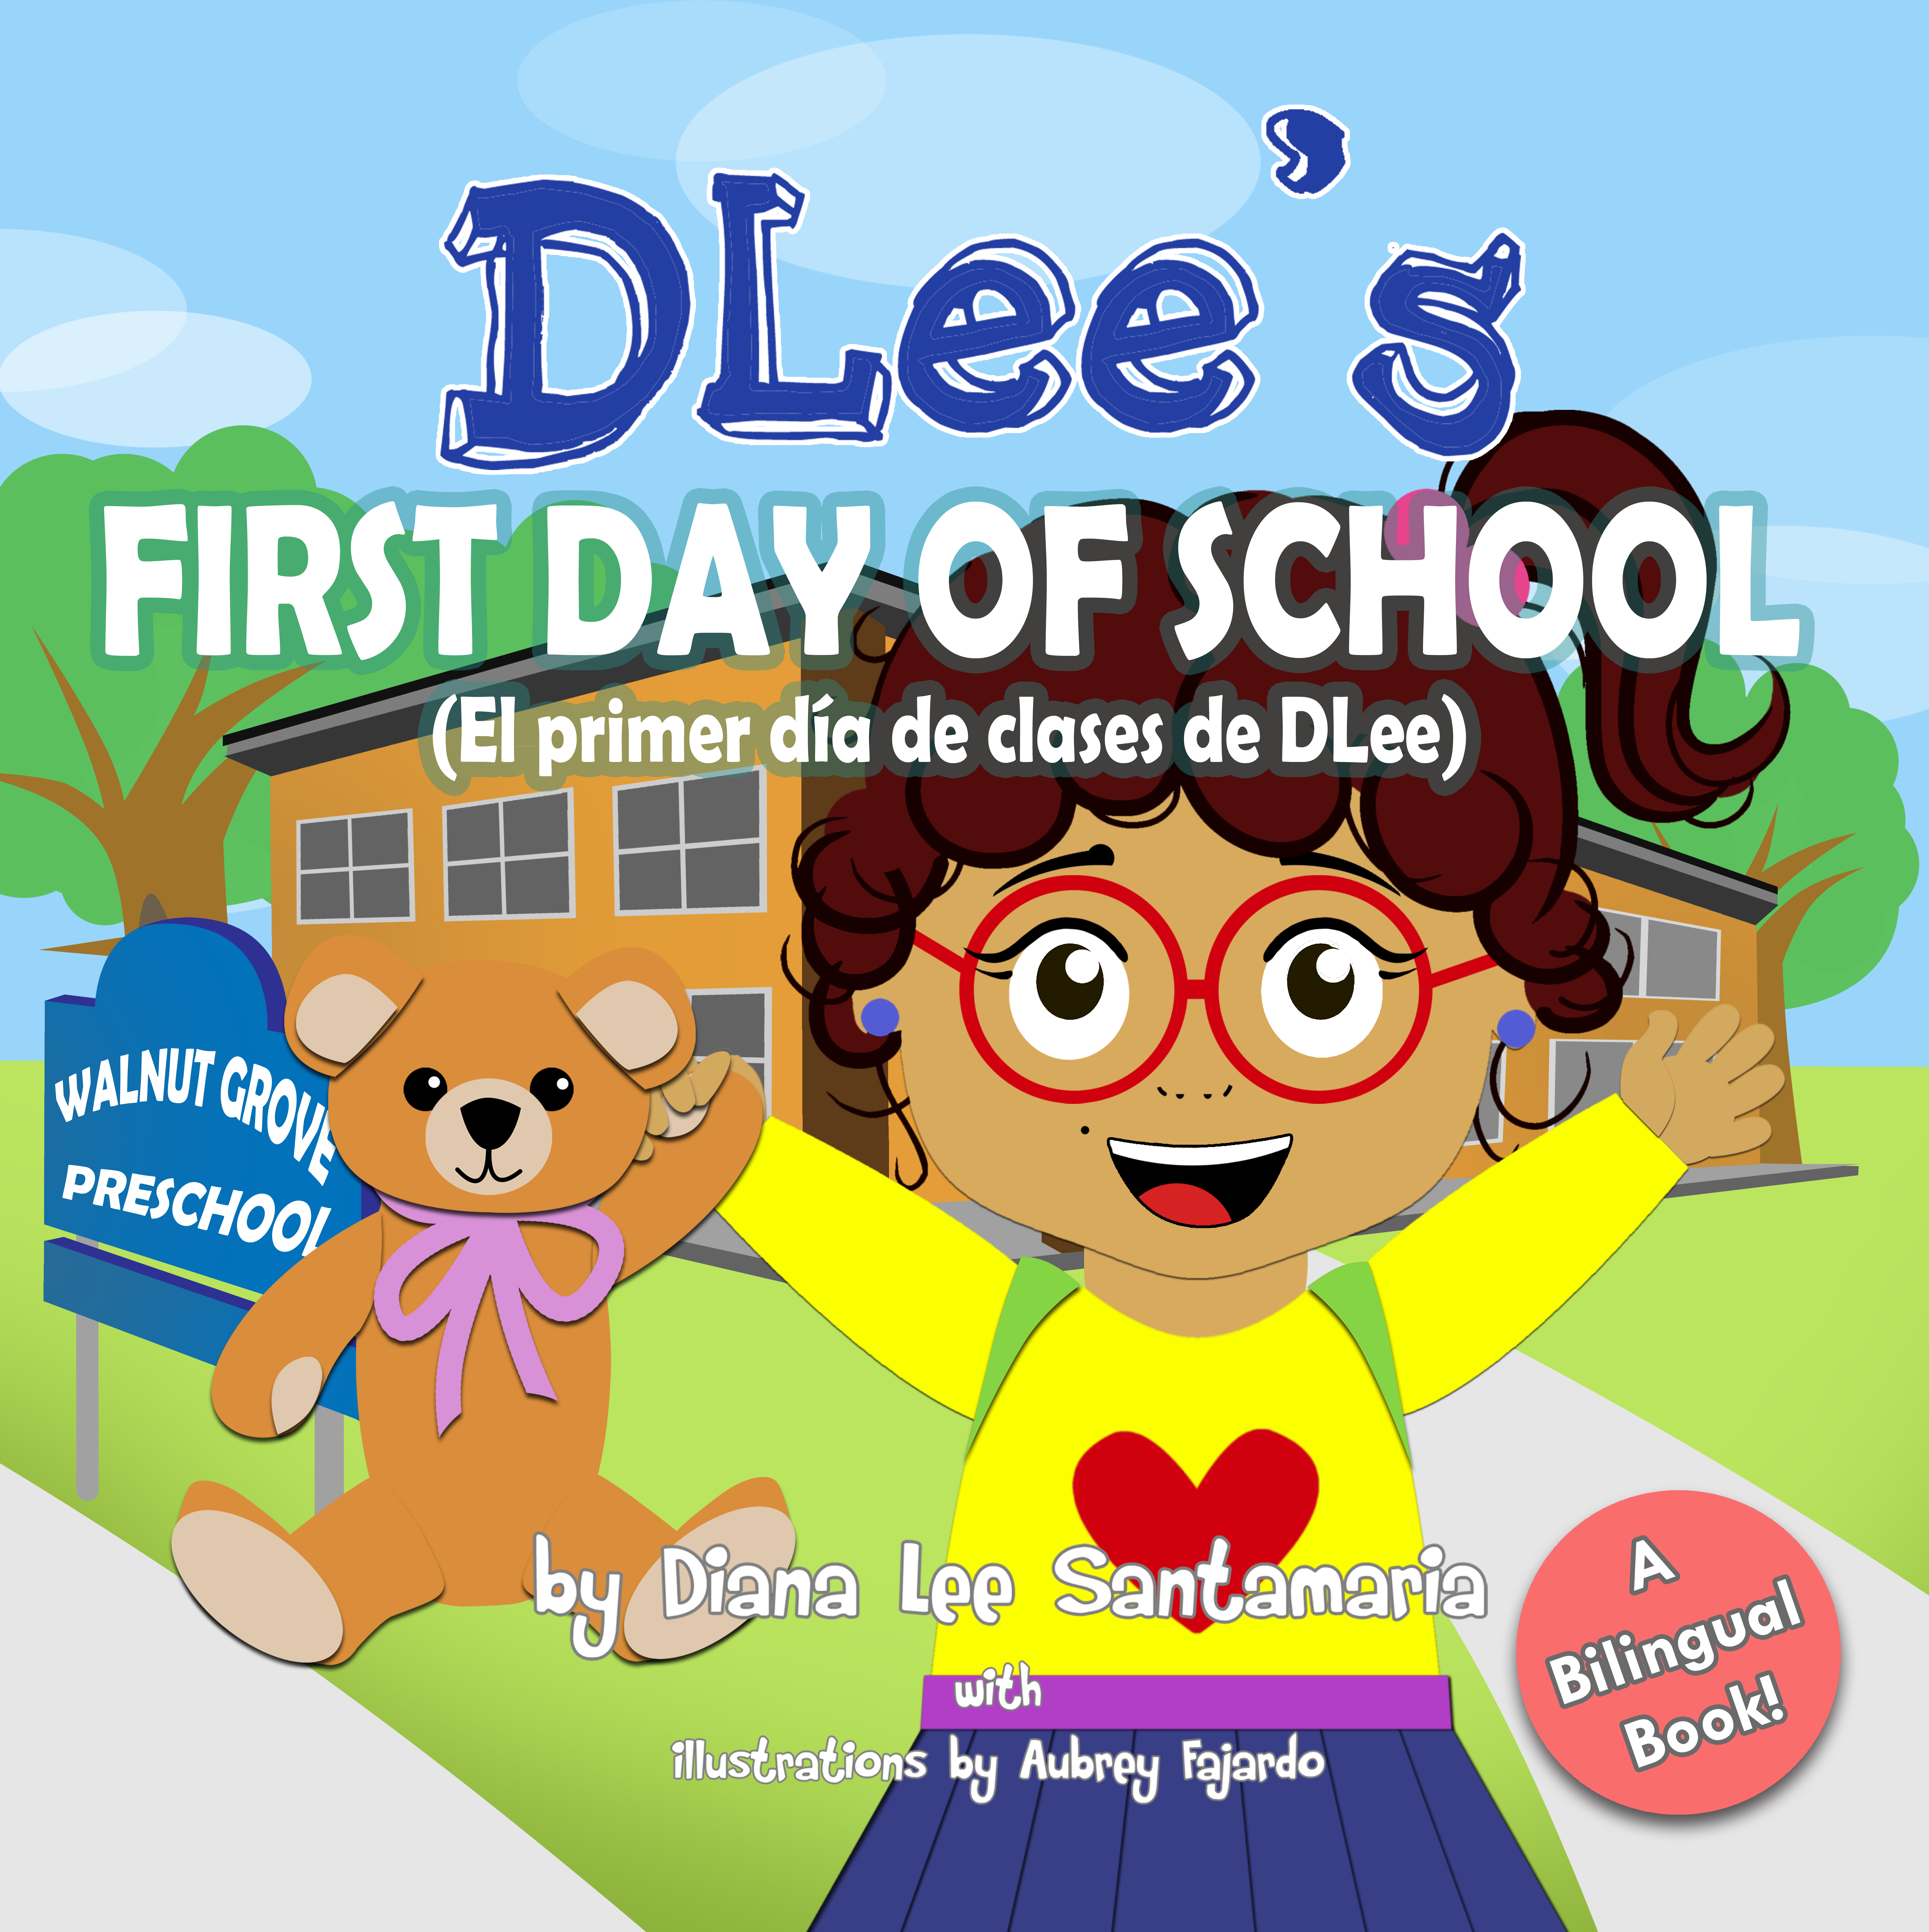 DLee's First Day of School (Bilingual Version)